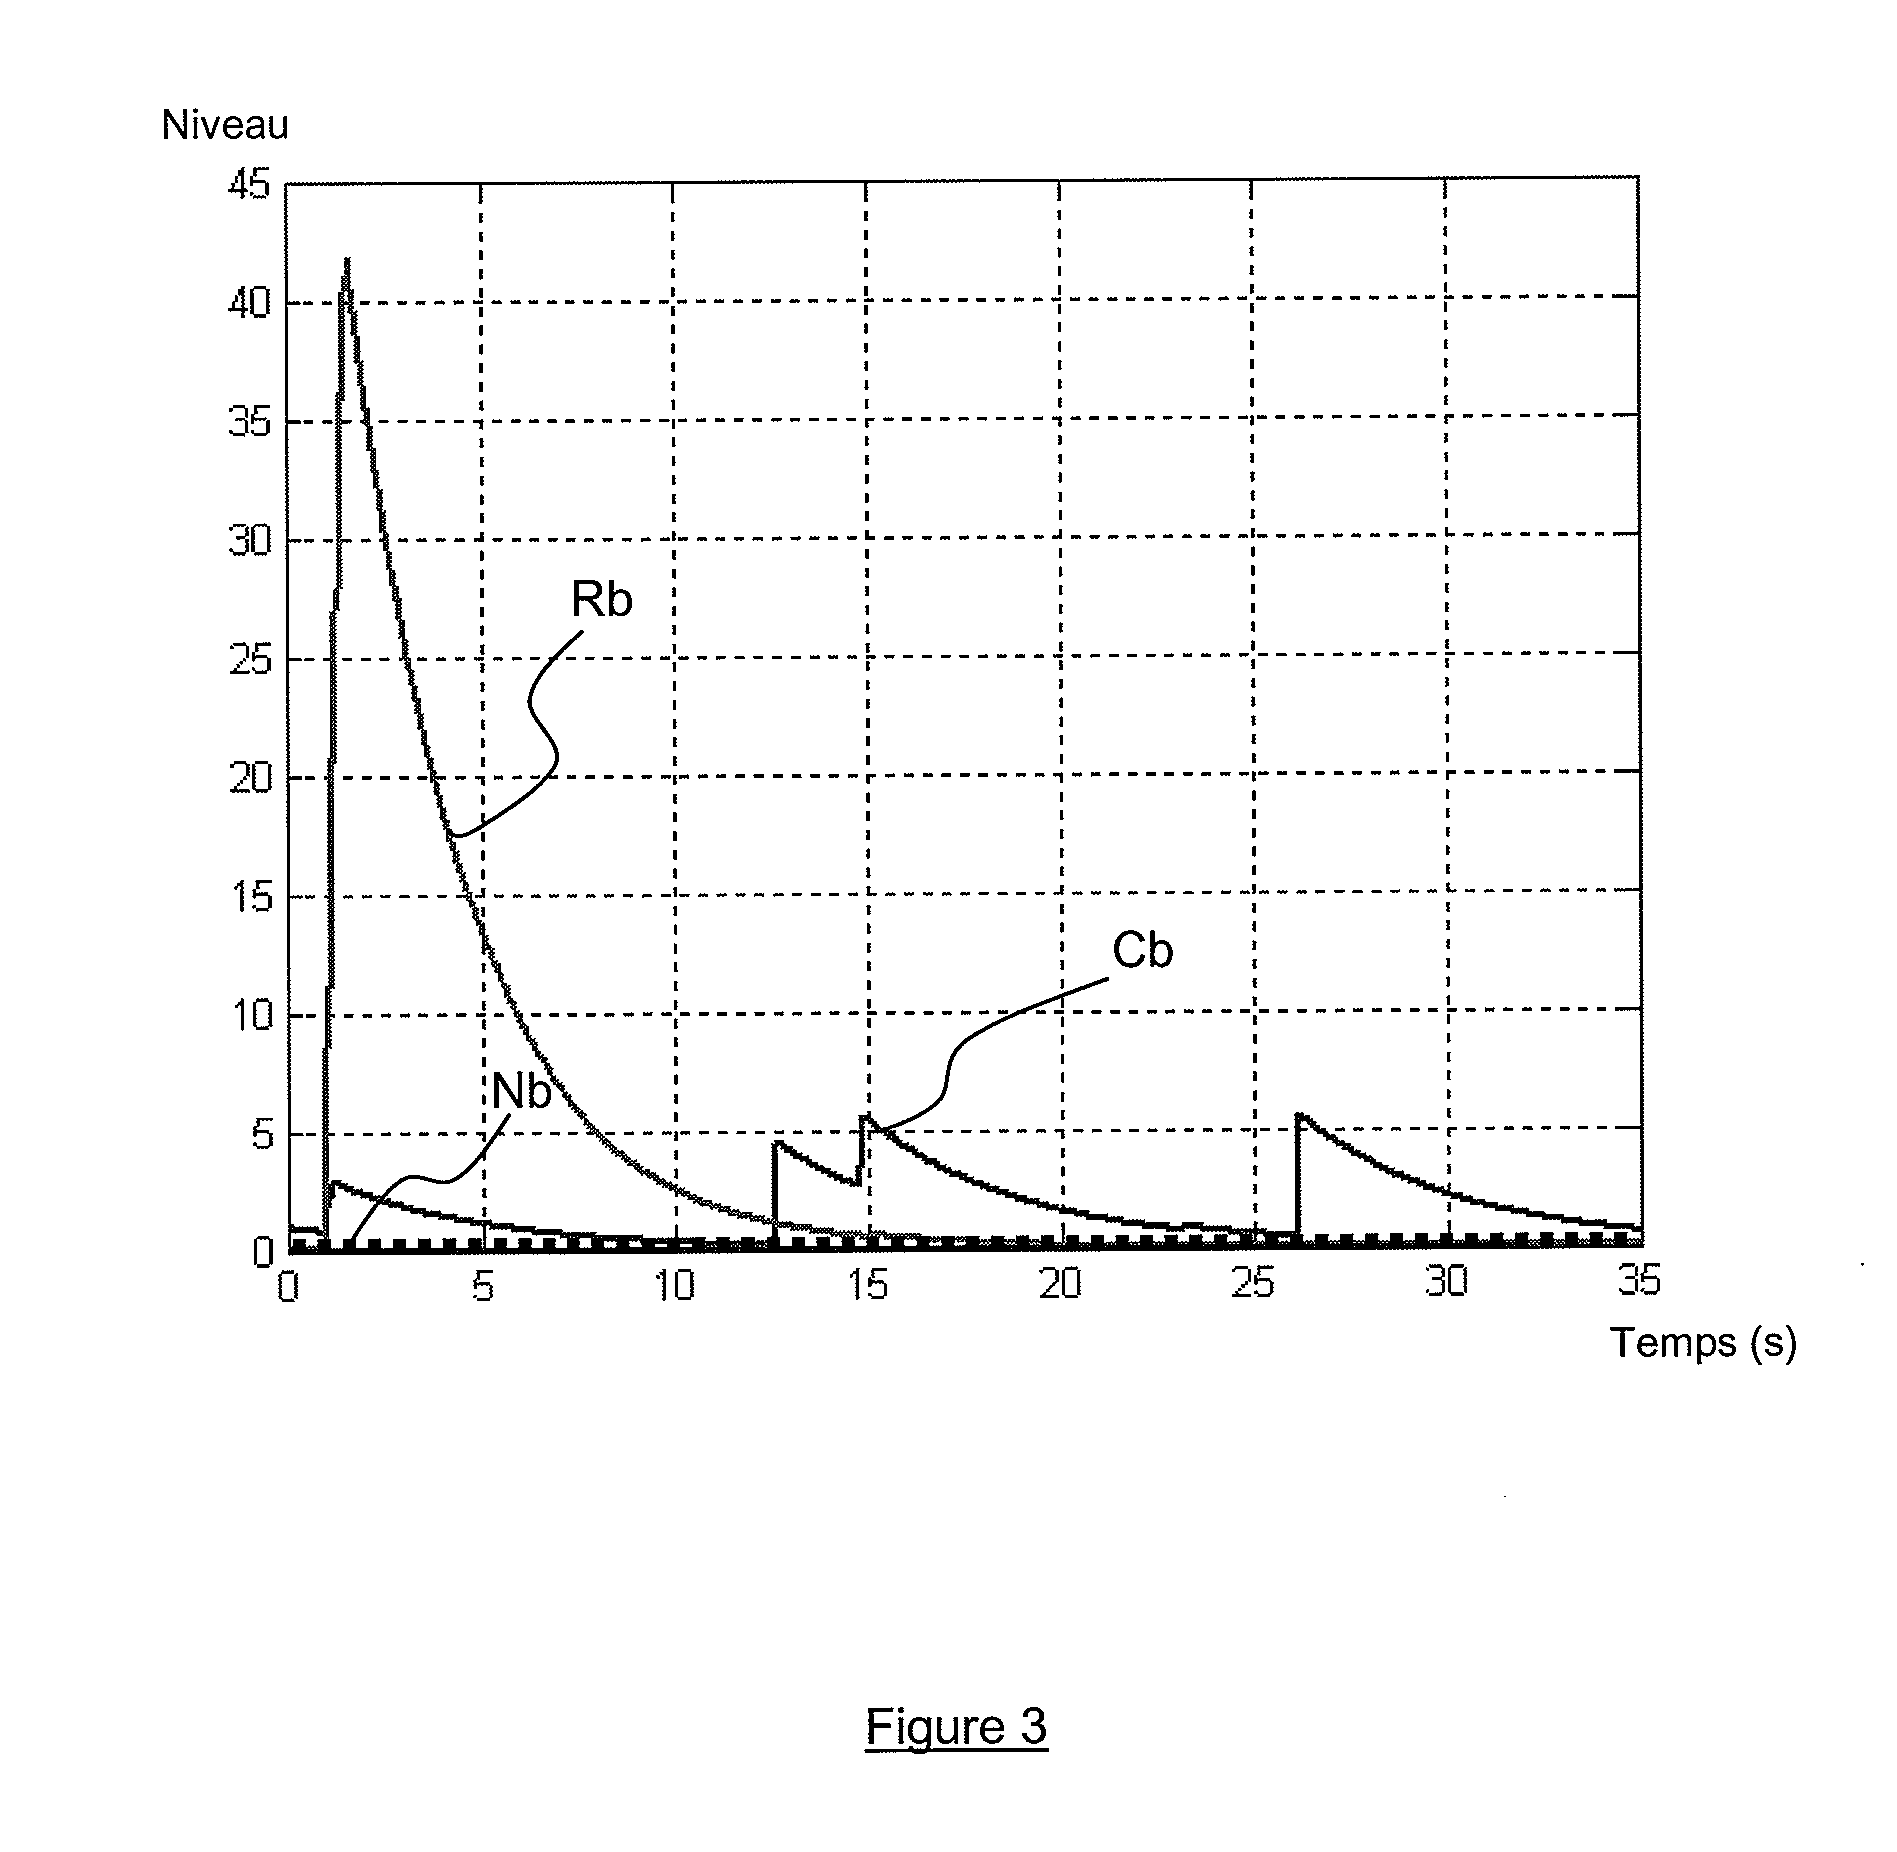 Abnormal combustion detection method for internal-combustion engines